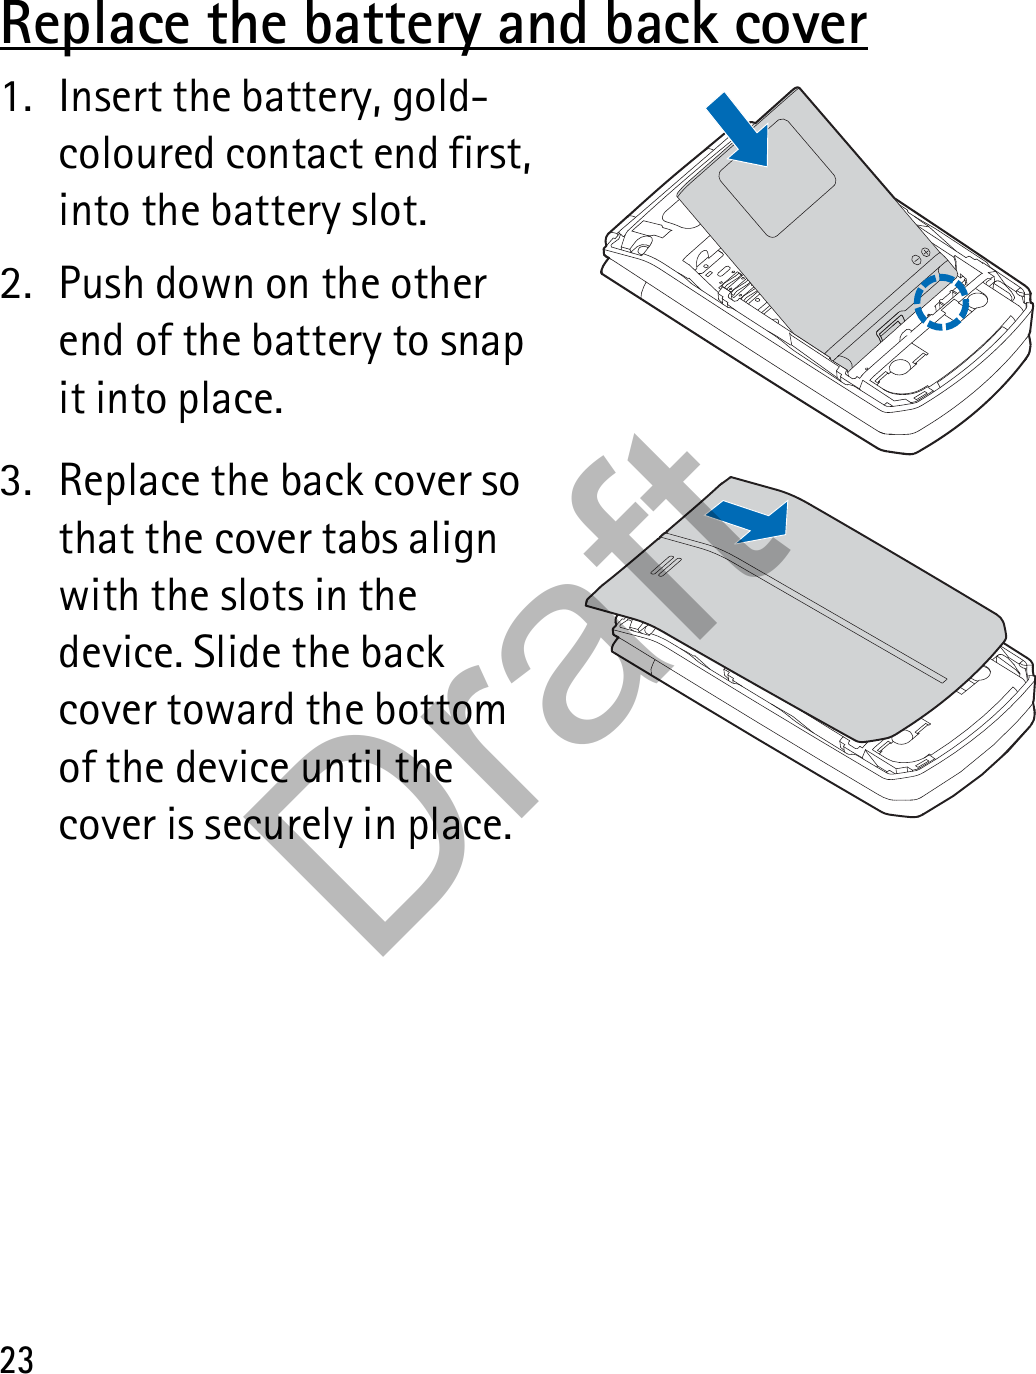 23Replace the battery and back cover1. Insert the battery, gold-coloured contact end first, into the battery slot.2. Push down on the other end of the battery to snap it into place.3. Replace the back cover so that the cover tabs align with the slots in the device. Slide the back cover toward the bottom of the device until the cover is securely in place.Draft